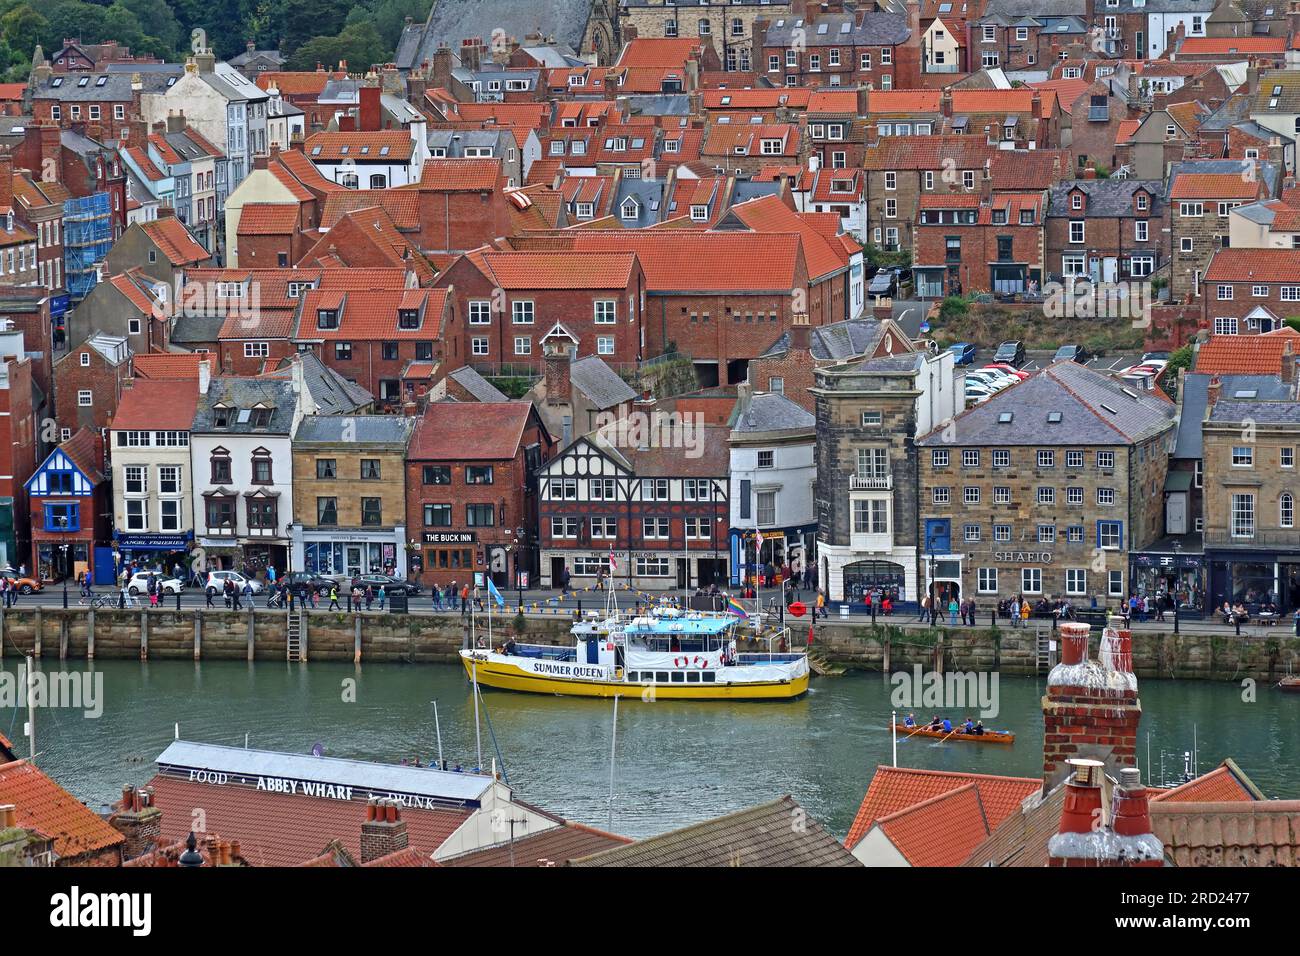 View of West Cliff, Whitby town, harbour and moorings, including a moored yellow fishing boat, North Yorkshire, England, UK, YO21 3PU Stock Photo